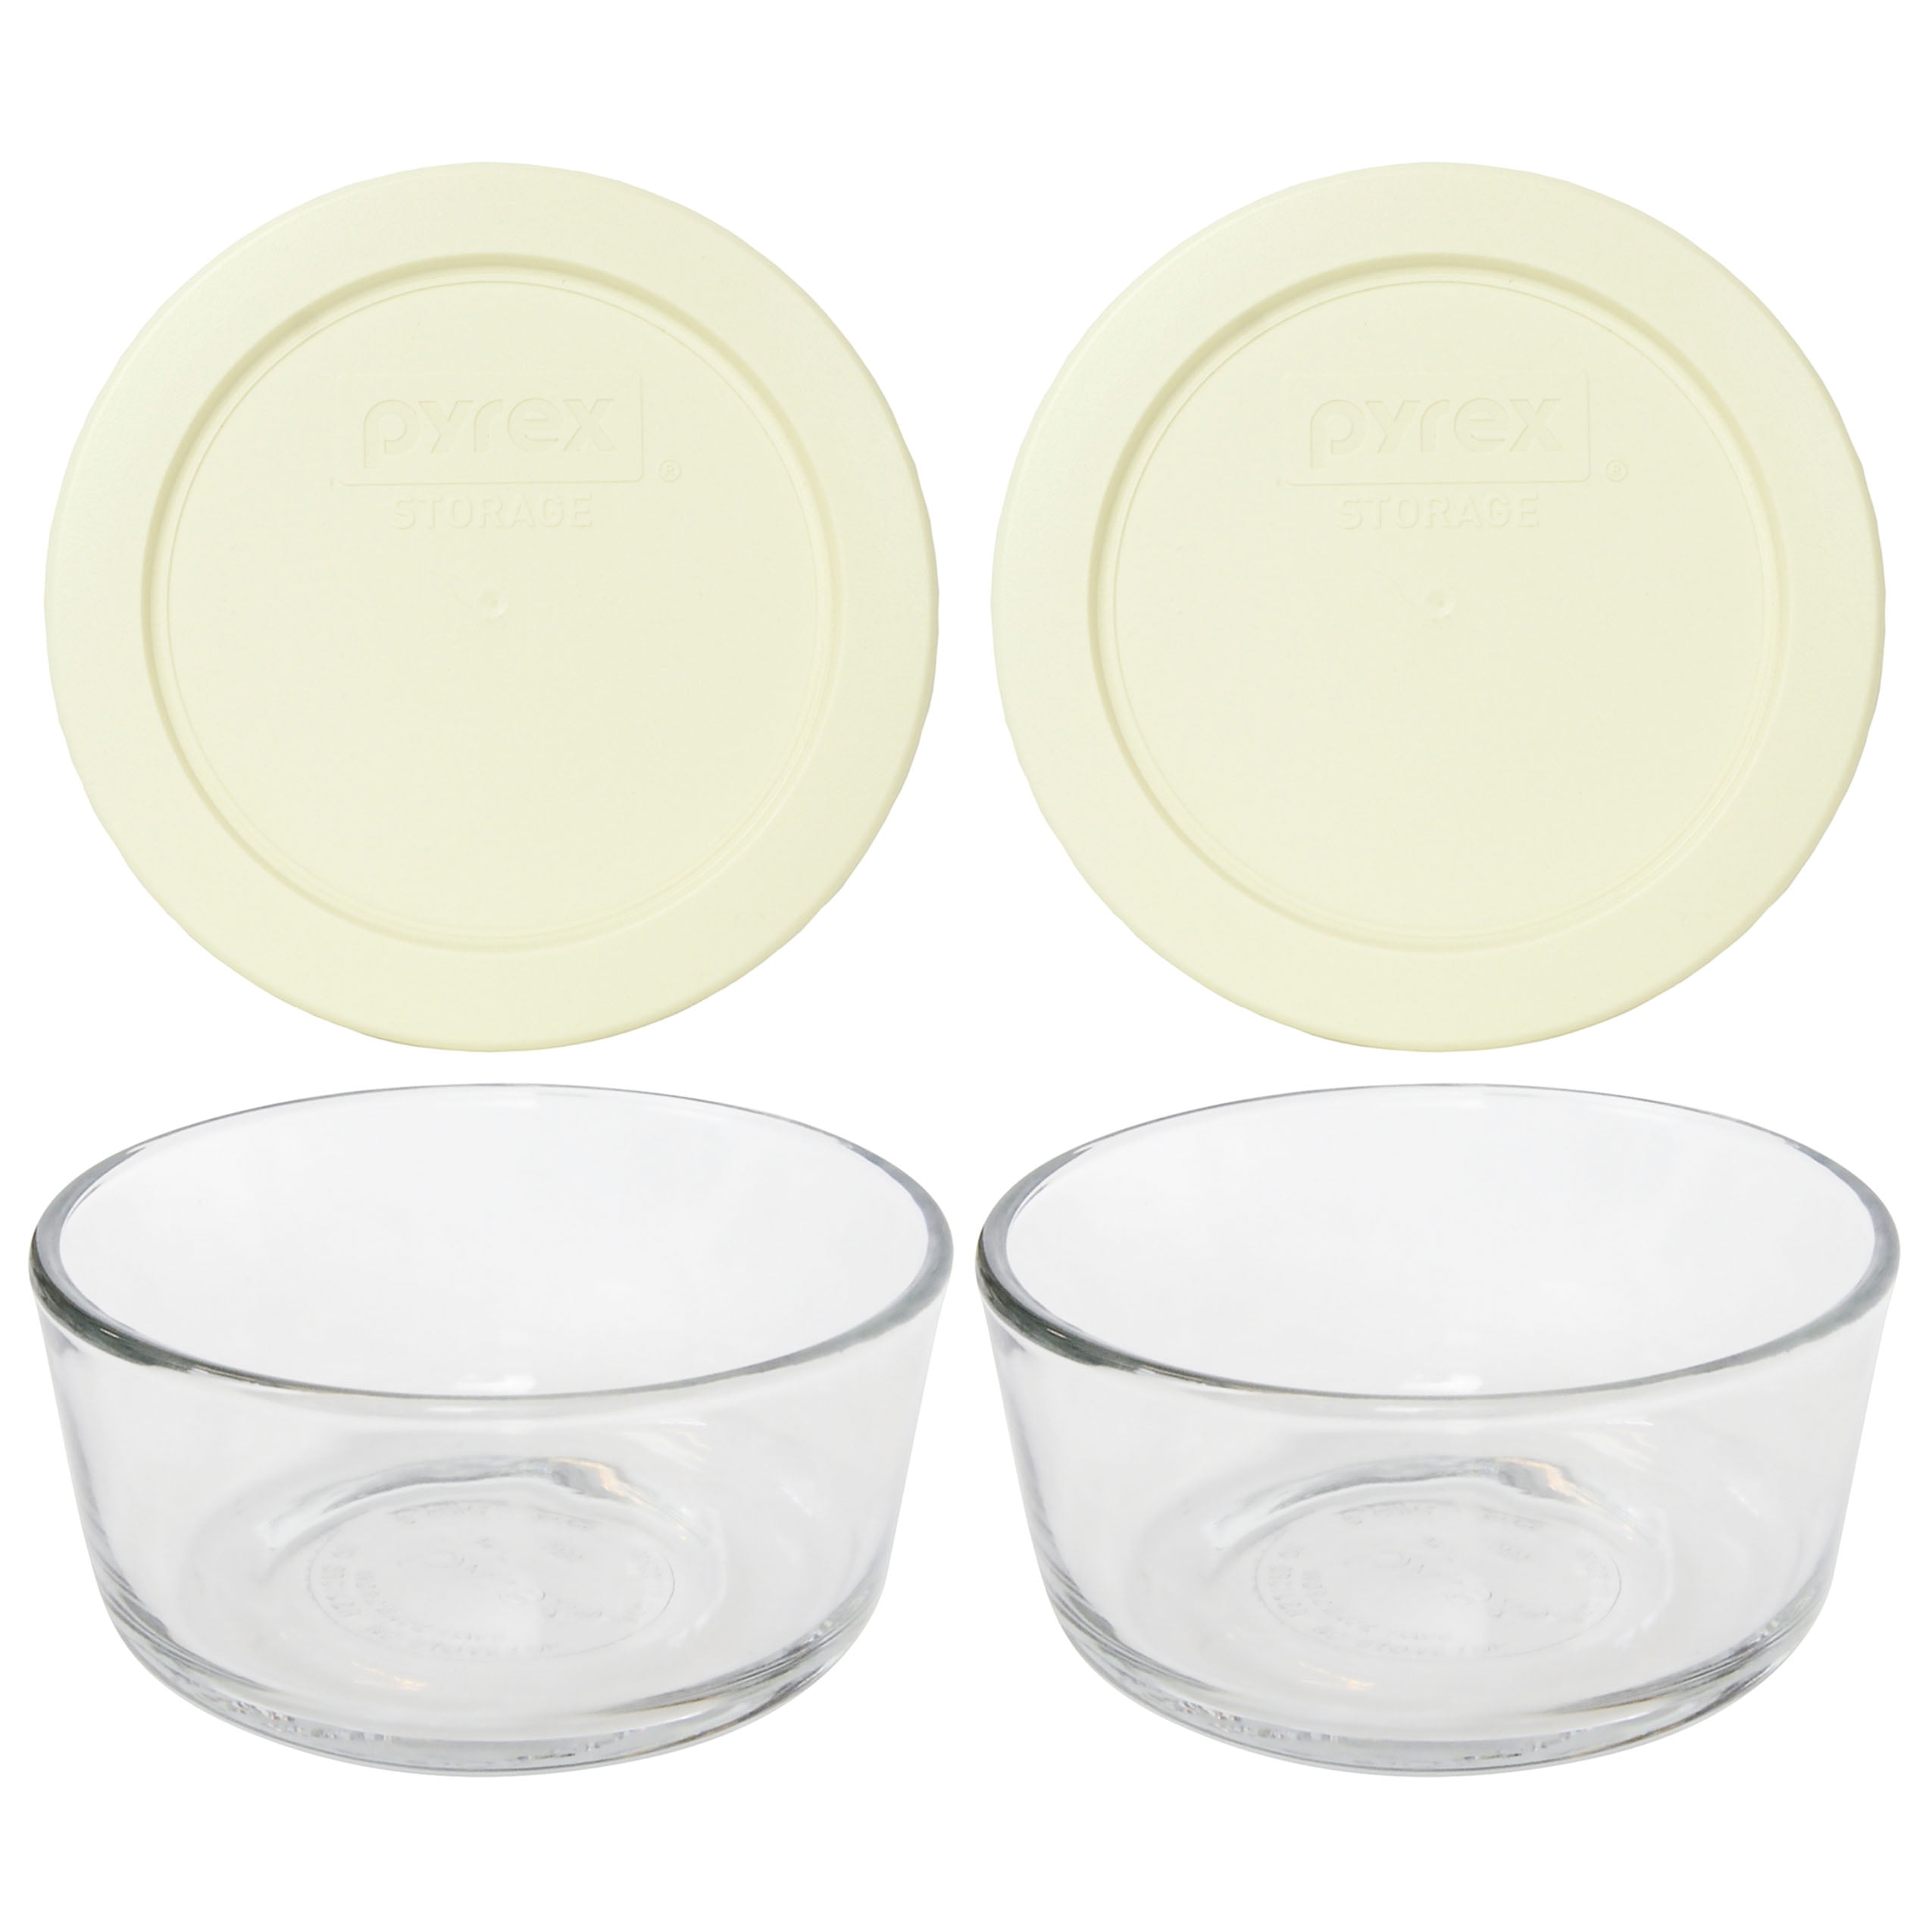 Home Basics NEW 5 PC Clear Glass Bowl Set With Plastic Lids 5 Piece SC10851 